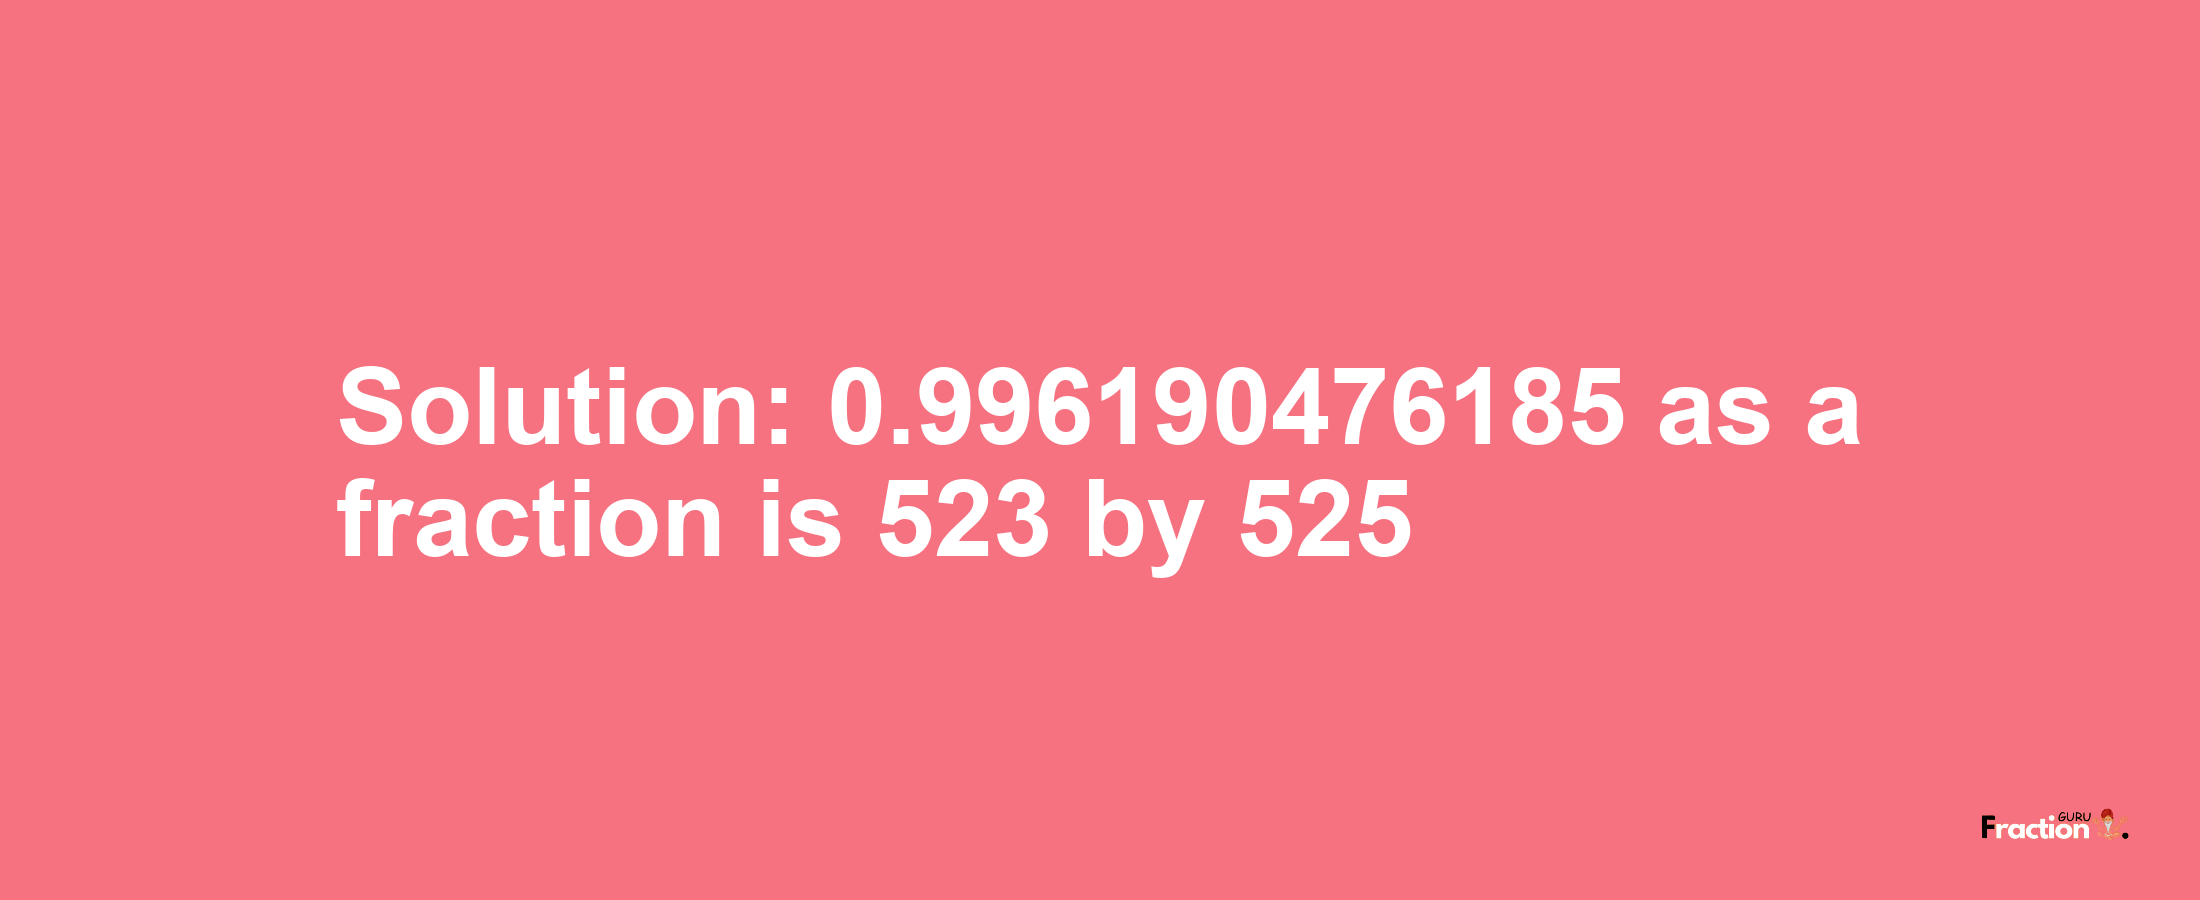 Solution:0.996190476185 as a fraction is 523/525